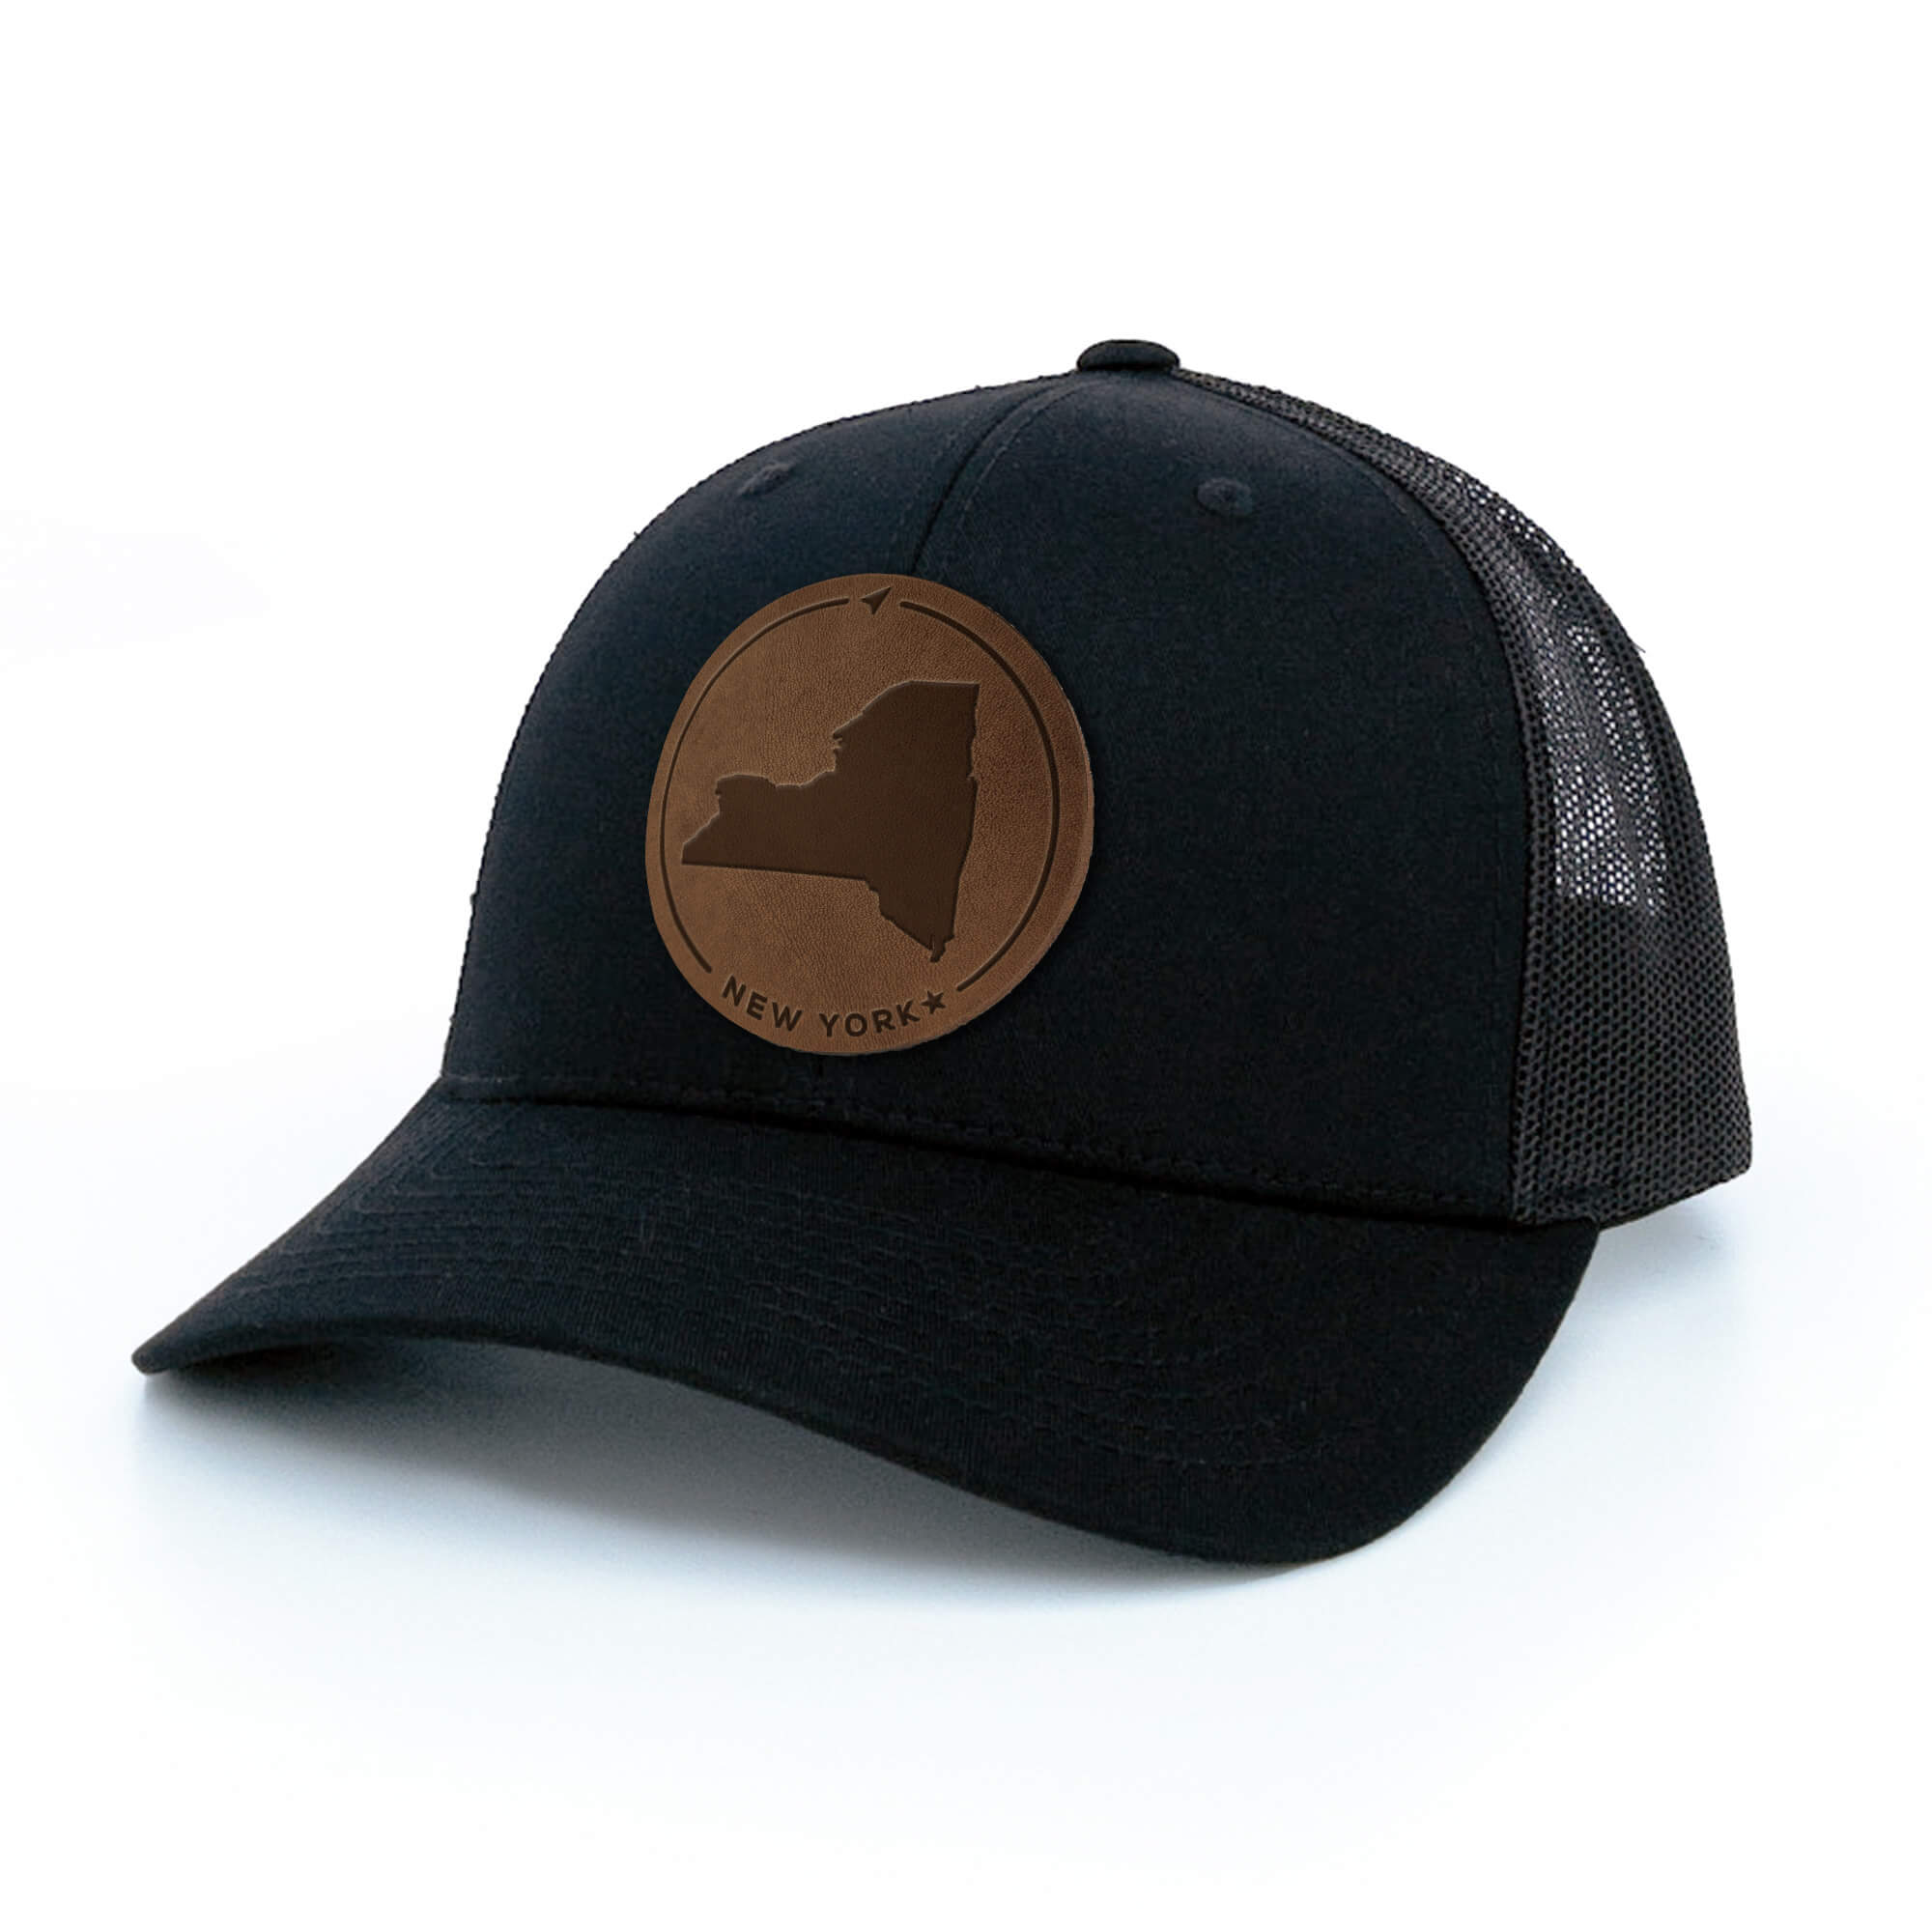 Black trucker hat with full-grain leather patch of New York | BLACK-003-006, CHARC-003-006, NAVY-003-006, HGREY-003-006, MOSS-003-006, BROWN-003-006